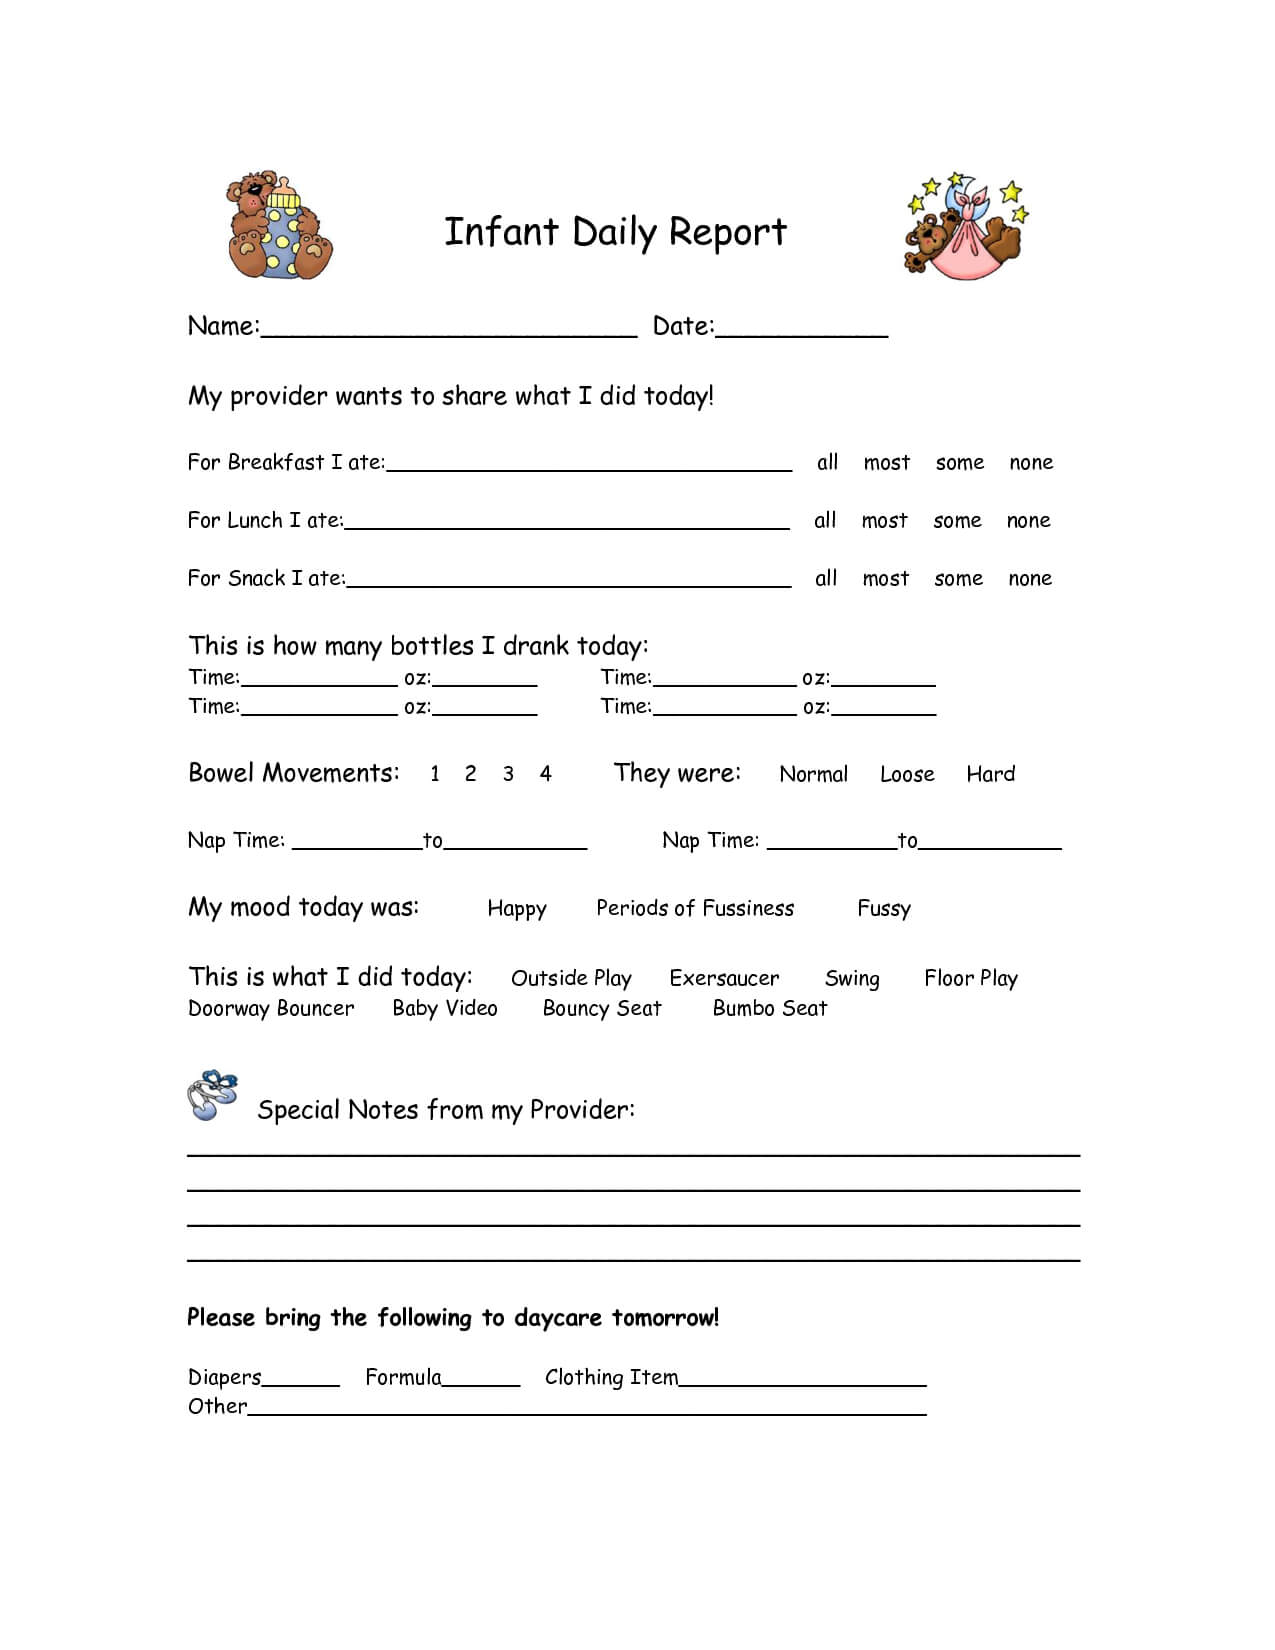 Pinjolynn Novak On Classroom | Daycare Daily Sheets Pertaining To Daycare Infant Daily Report Template